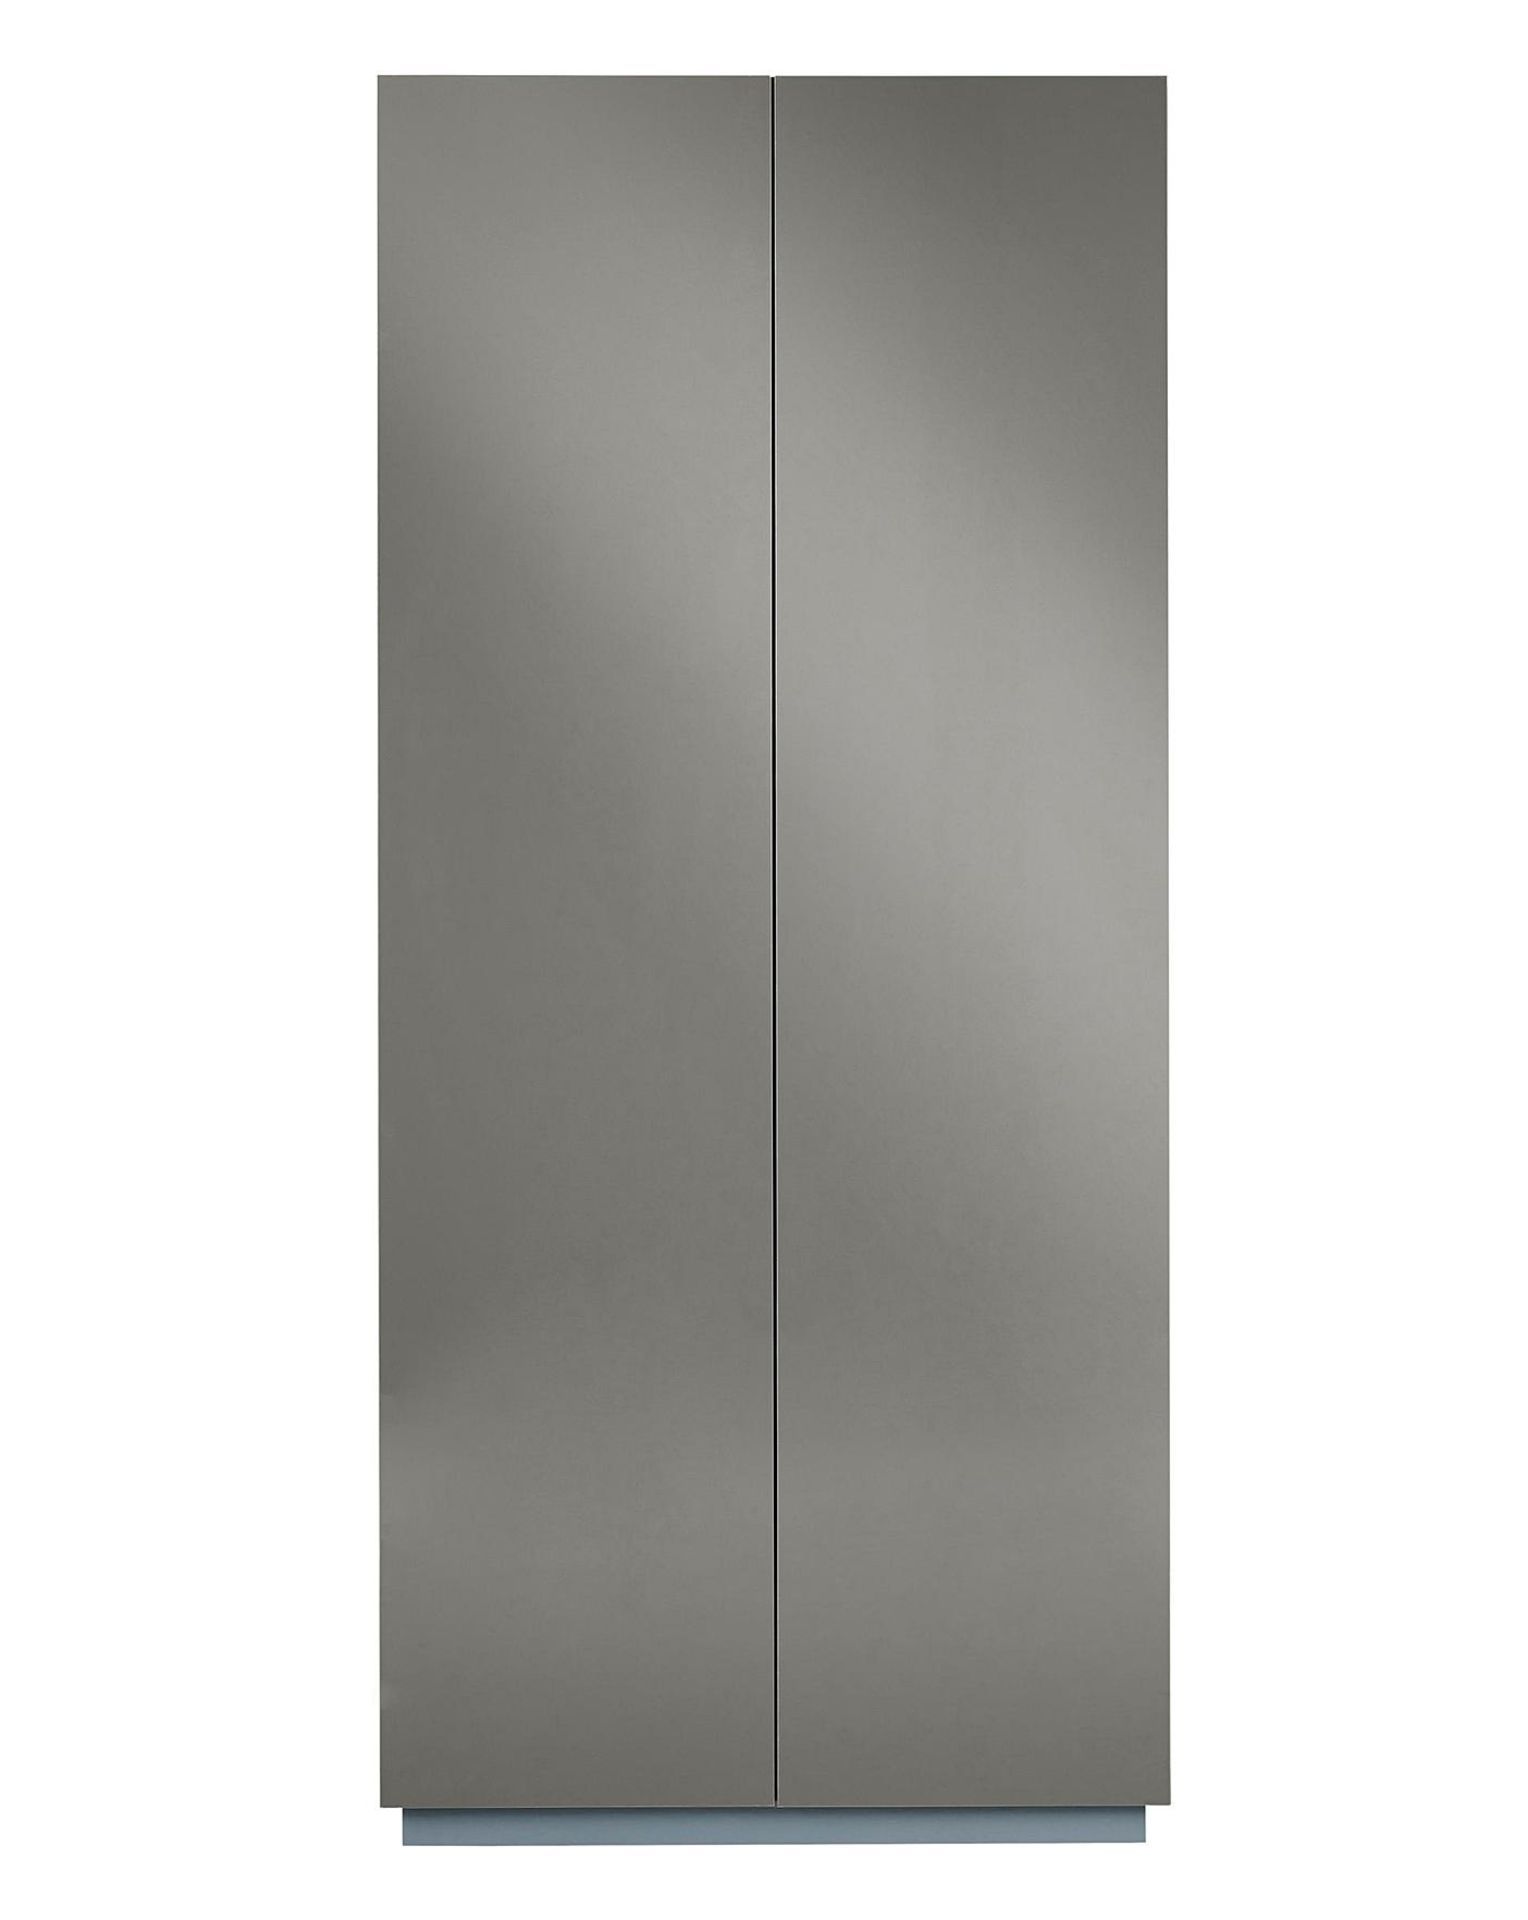 NEW & BOXED ALLURE High Gloss 2 Door Wardrobe - GREY. RRP £249. Part of At Home Collection, the